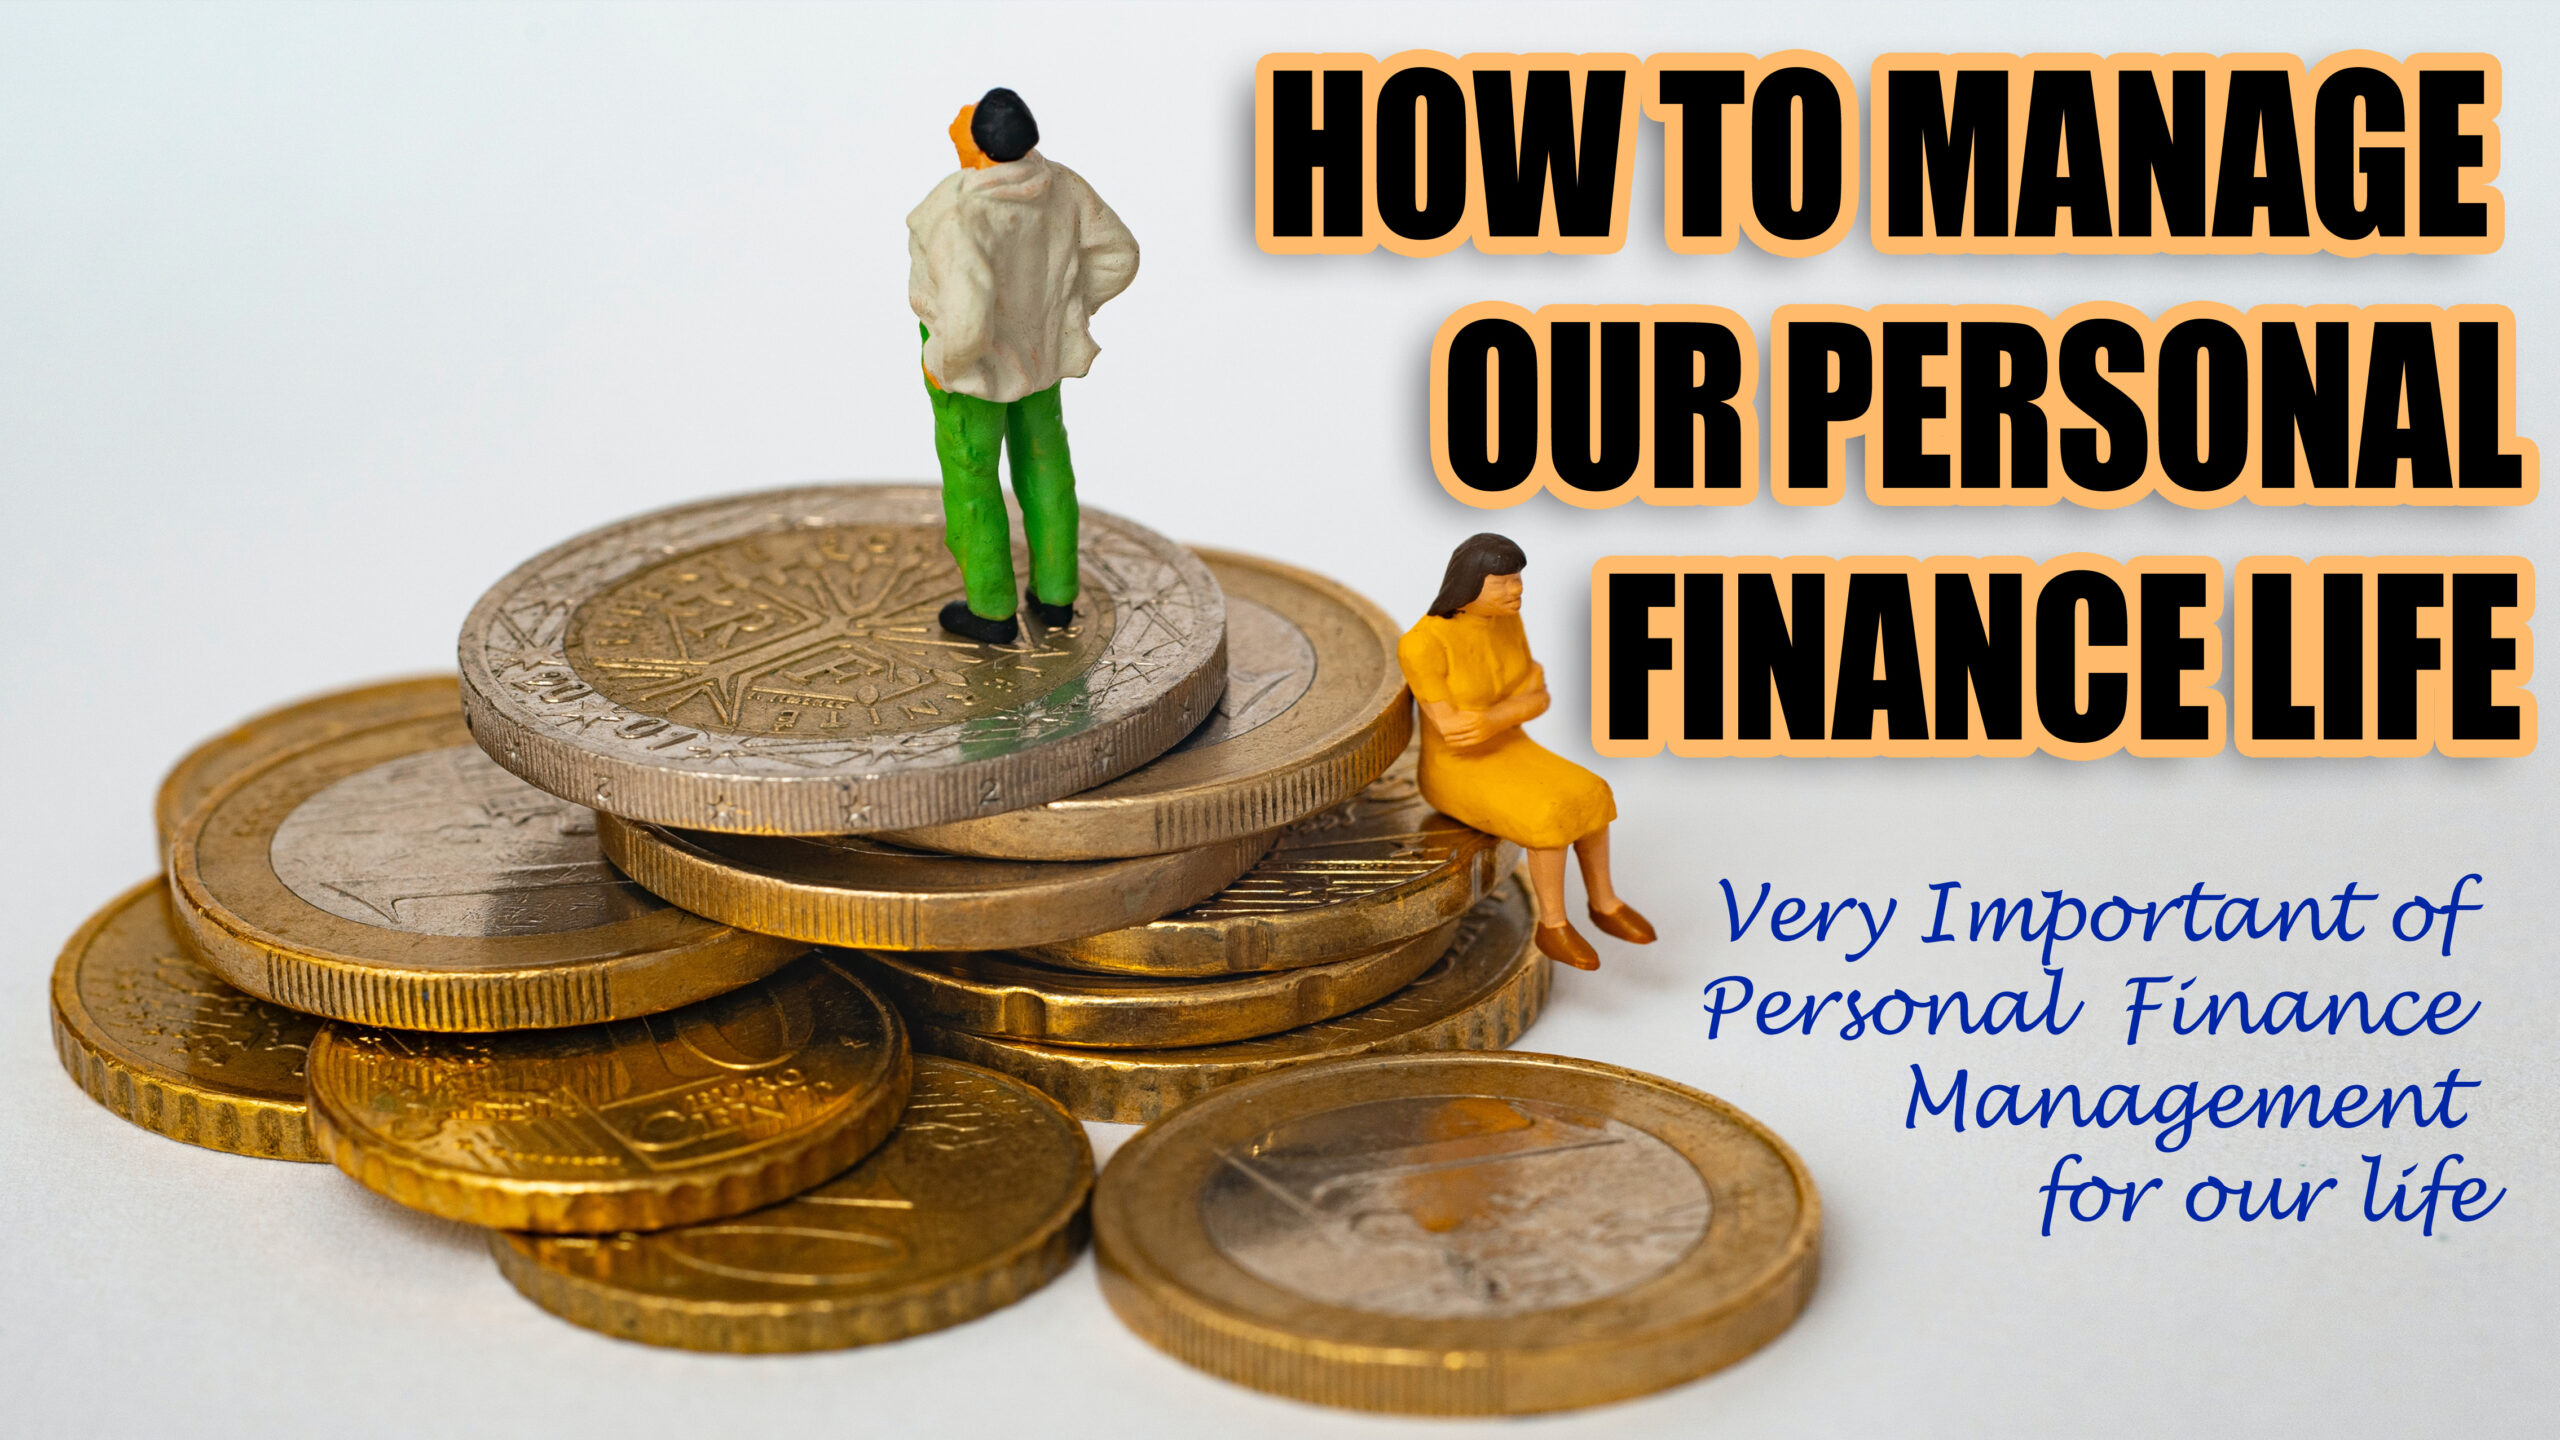 How to Manage Personal Finance Life